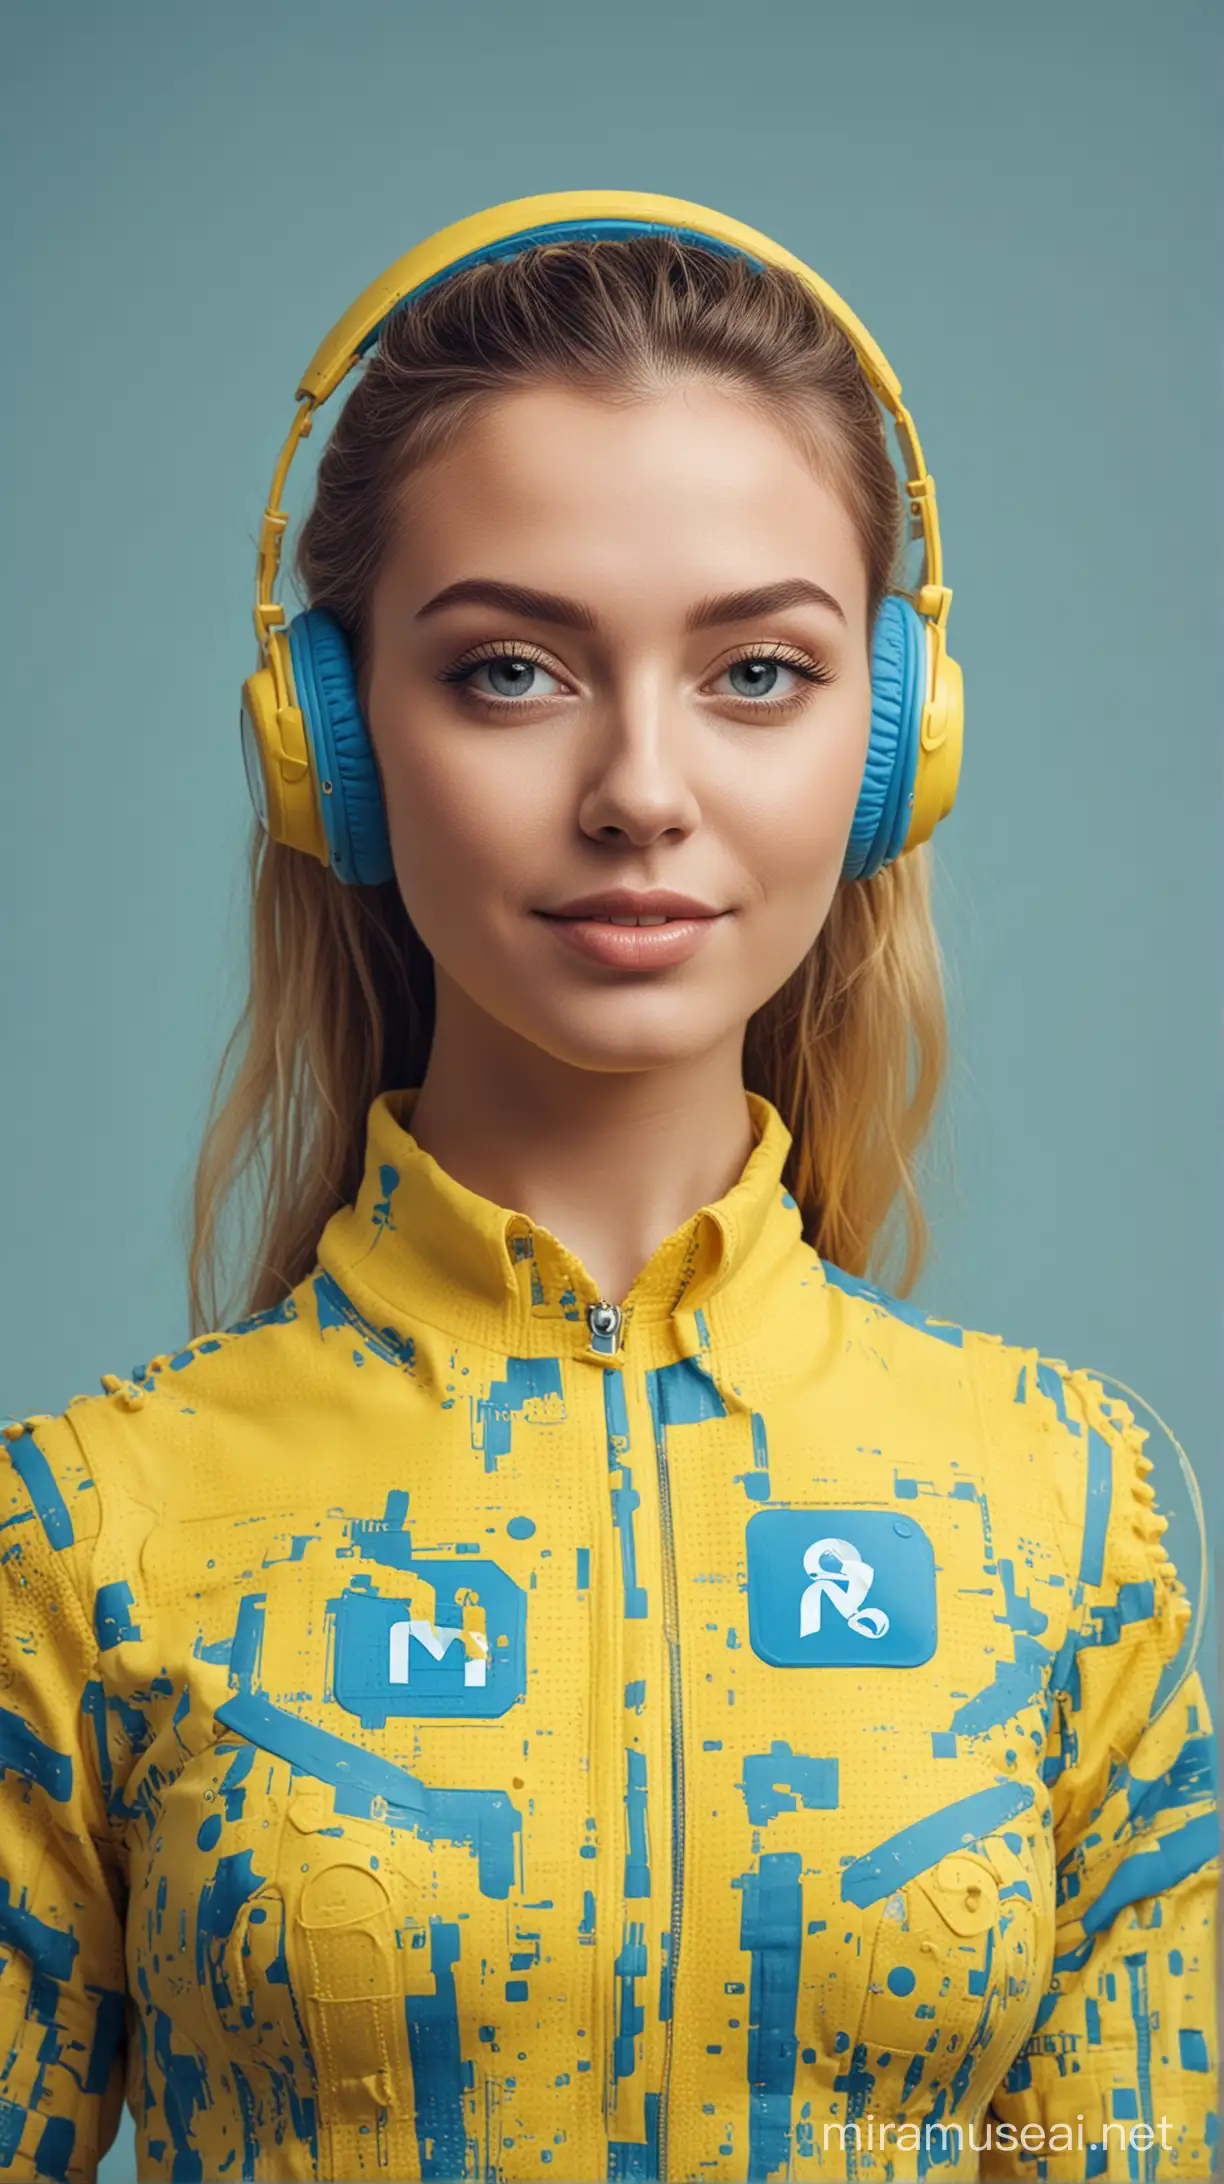 Vibrant Blue and Yellow Social Media Marketing with Artificial Intelligence